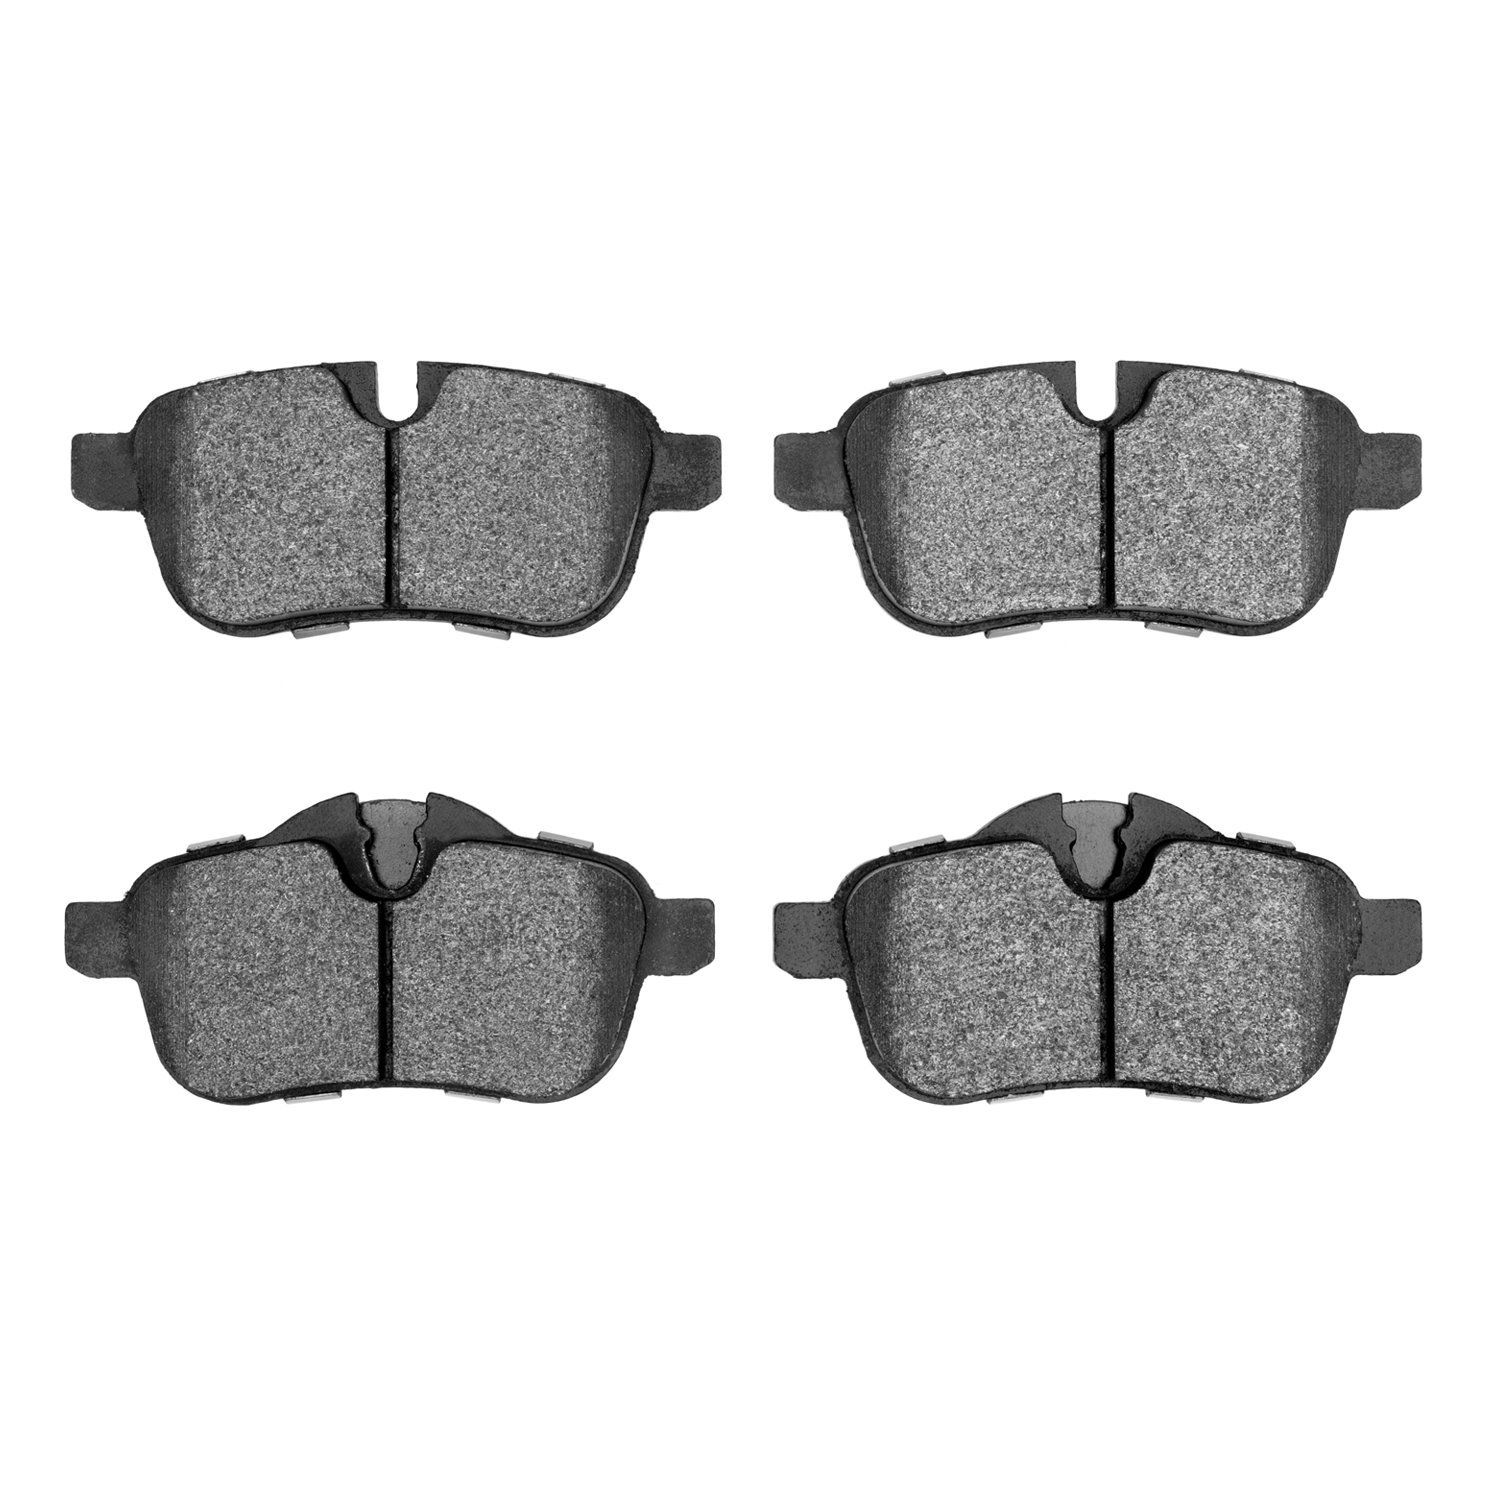 1310-1433-00 3000-Series Ceramic Brake Pads, Fits Select BMW, Position: Rear